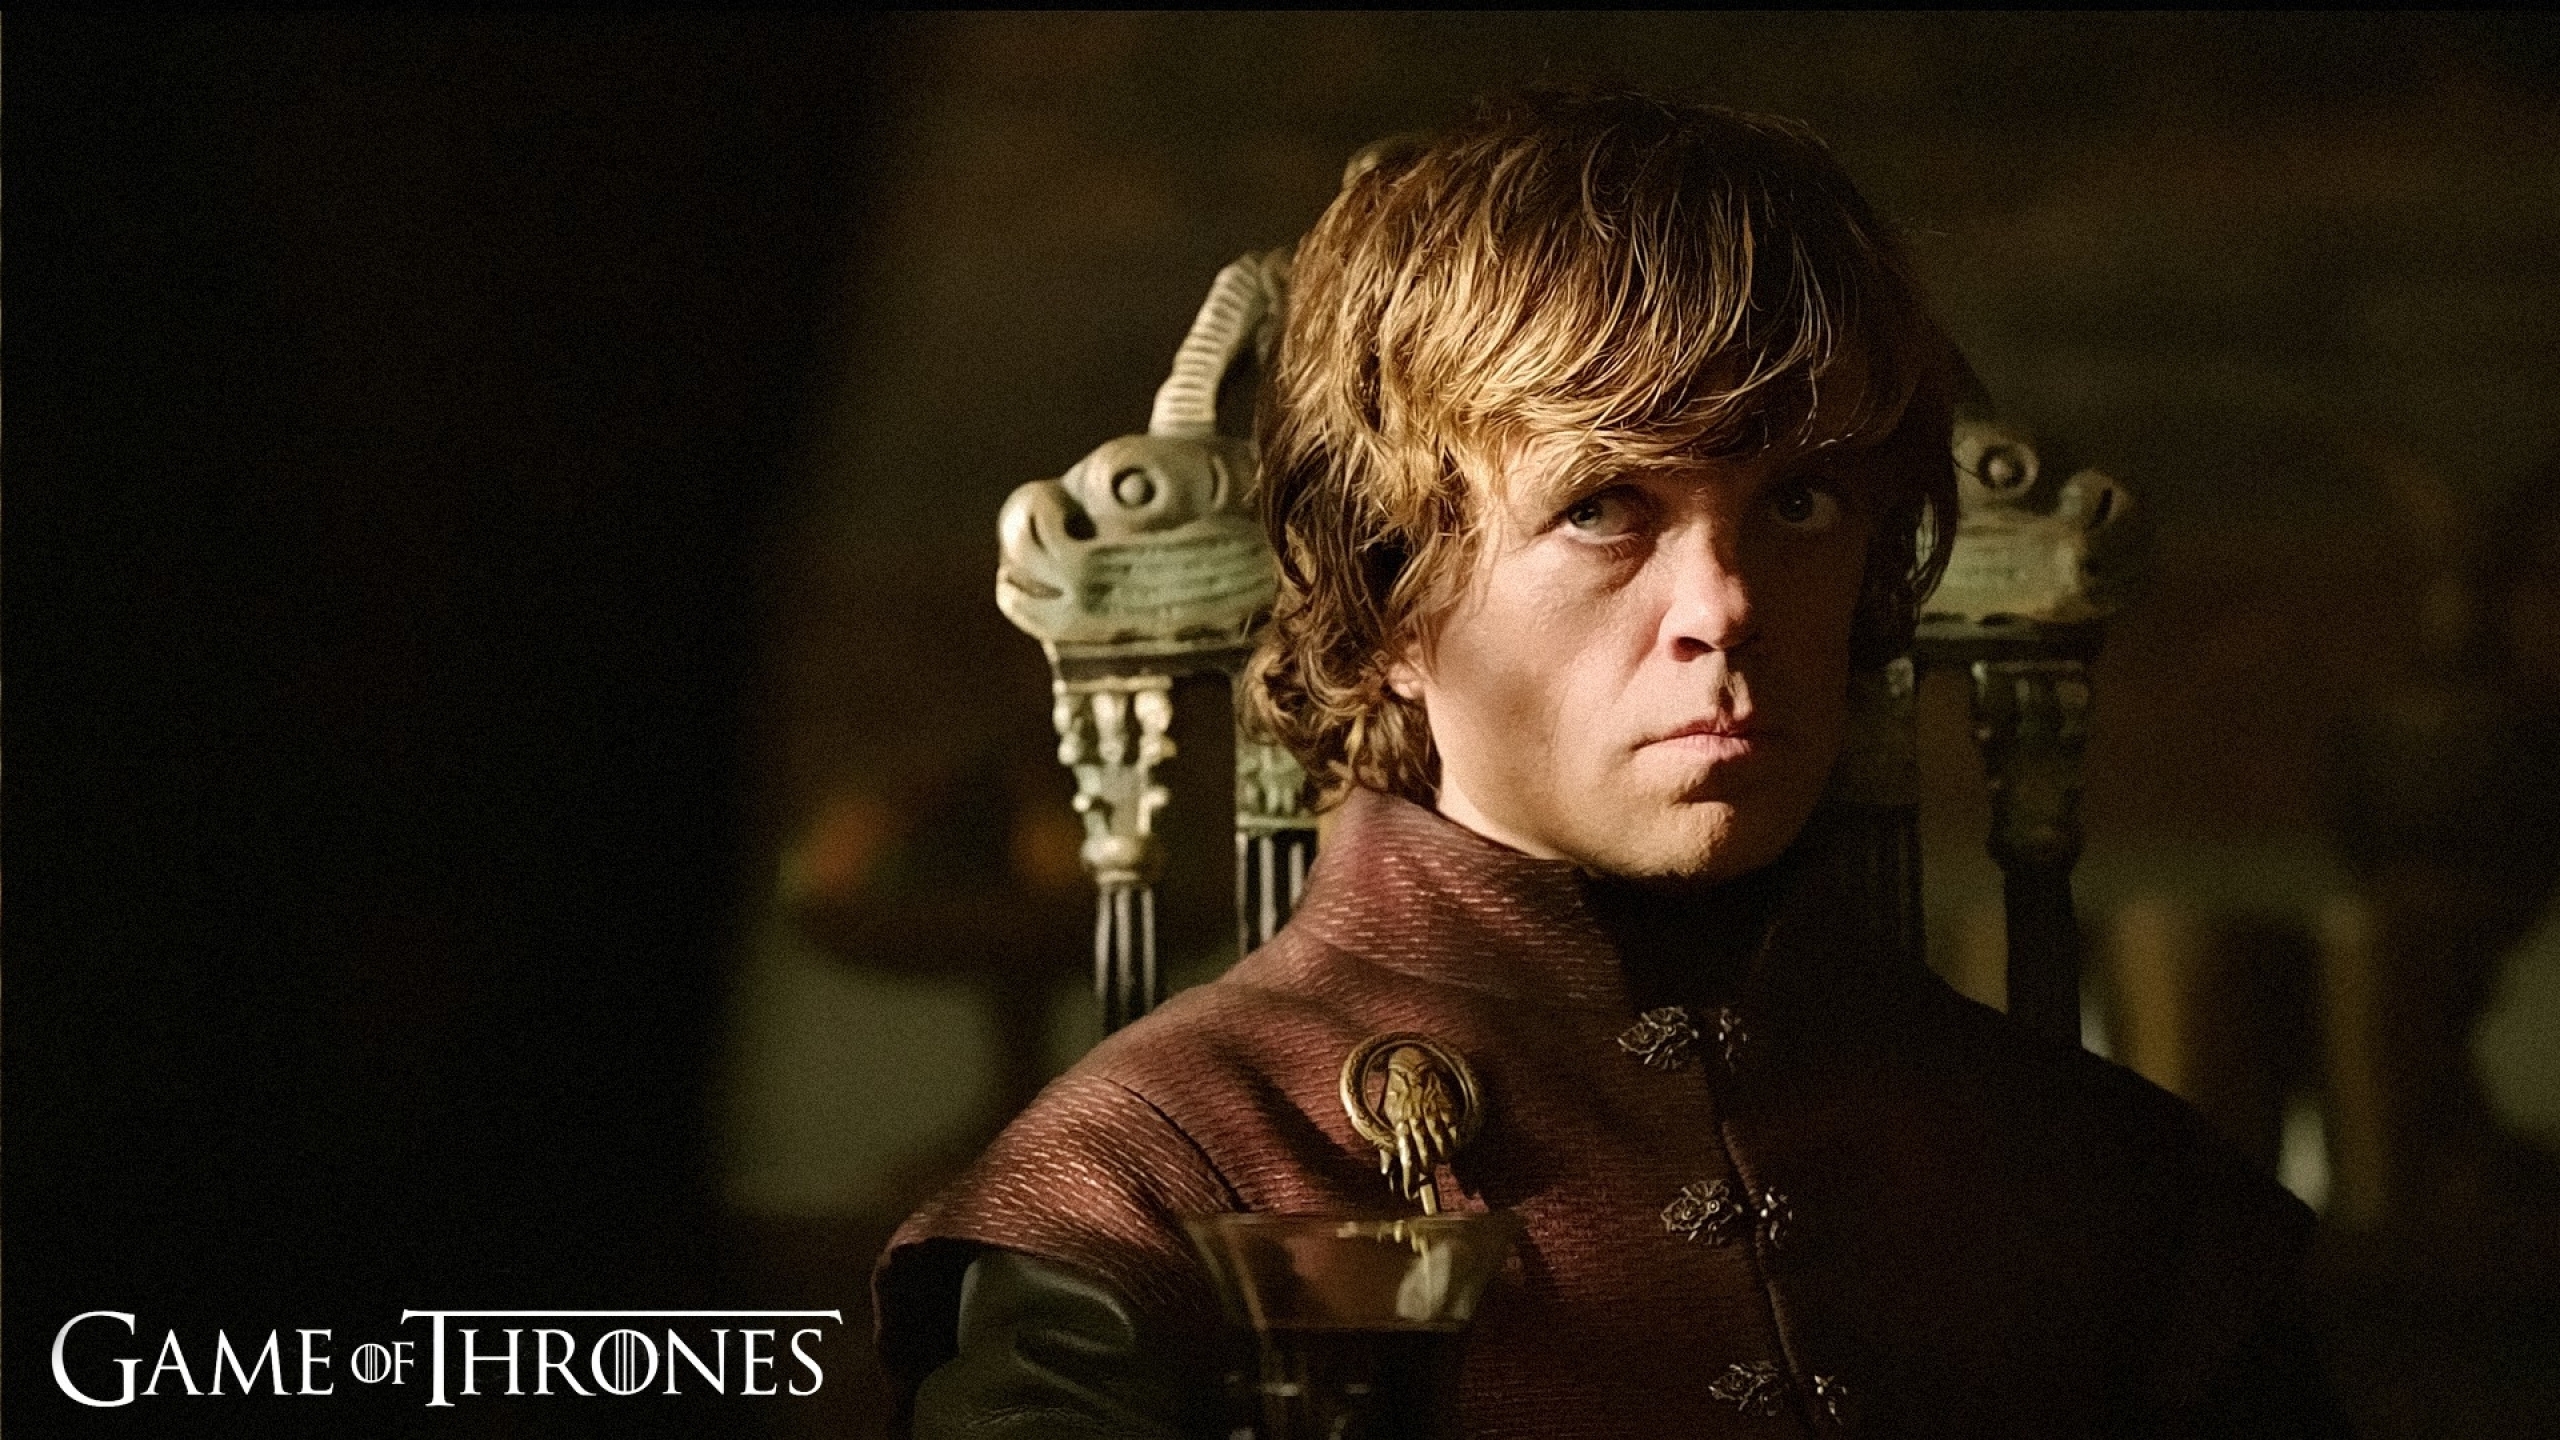 Tyrion Lannister  Free Stock Photos